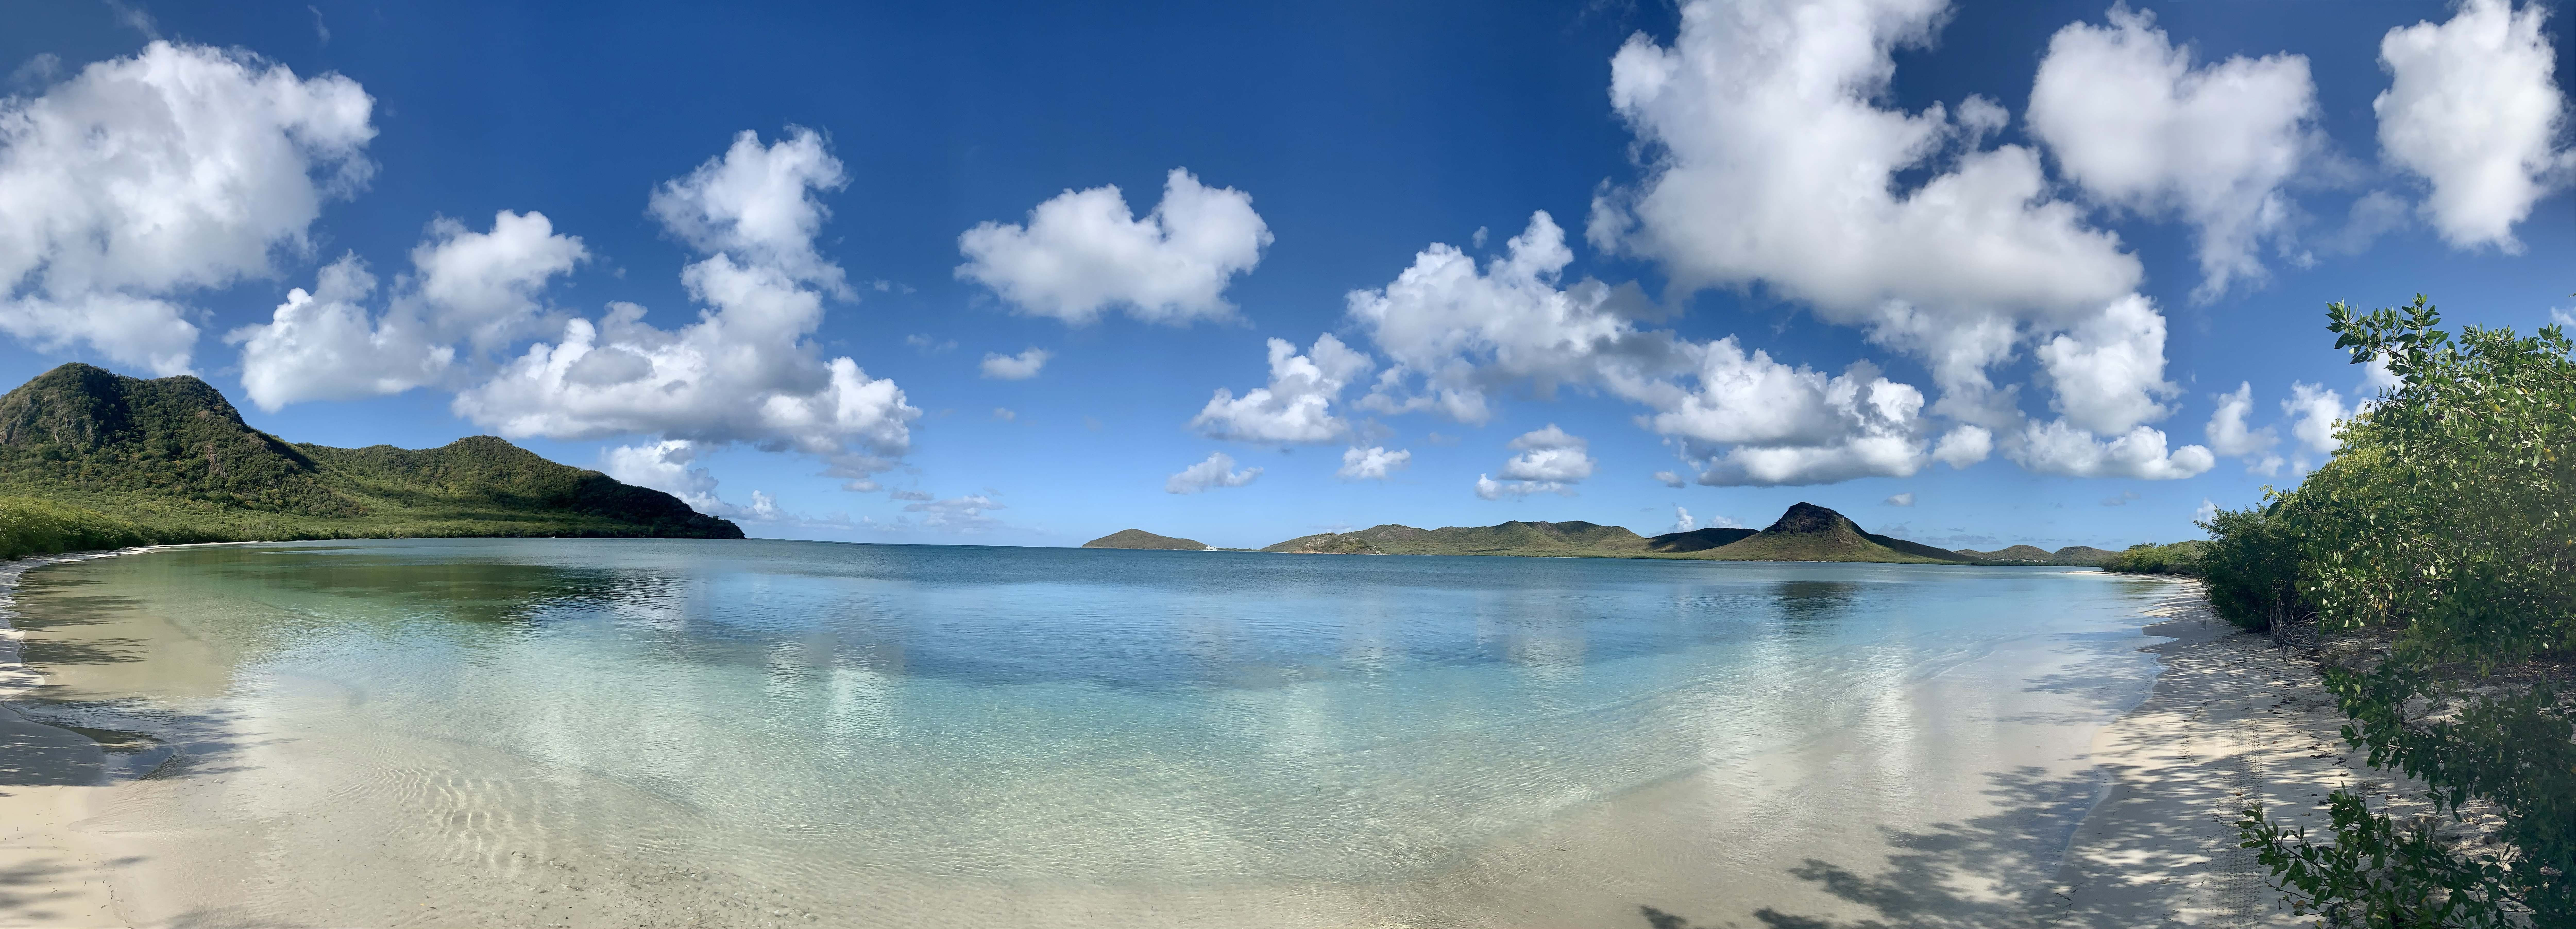 Beaches, community and easy living - why I find Antigua the perfect place to live  